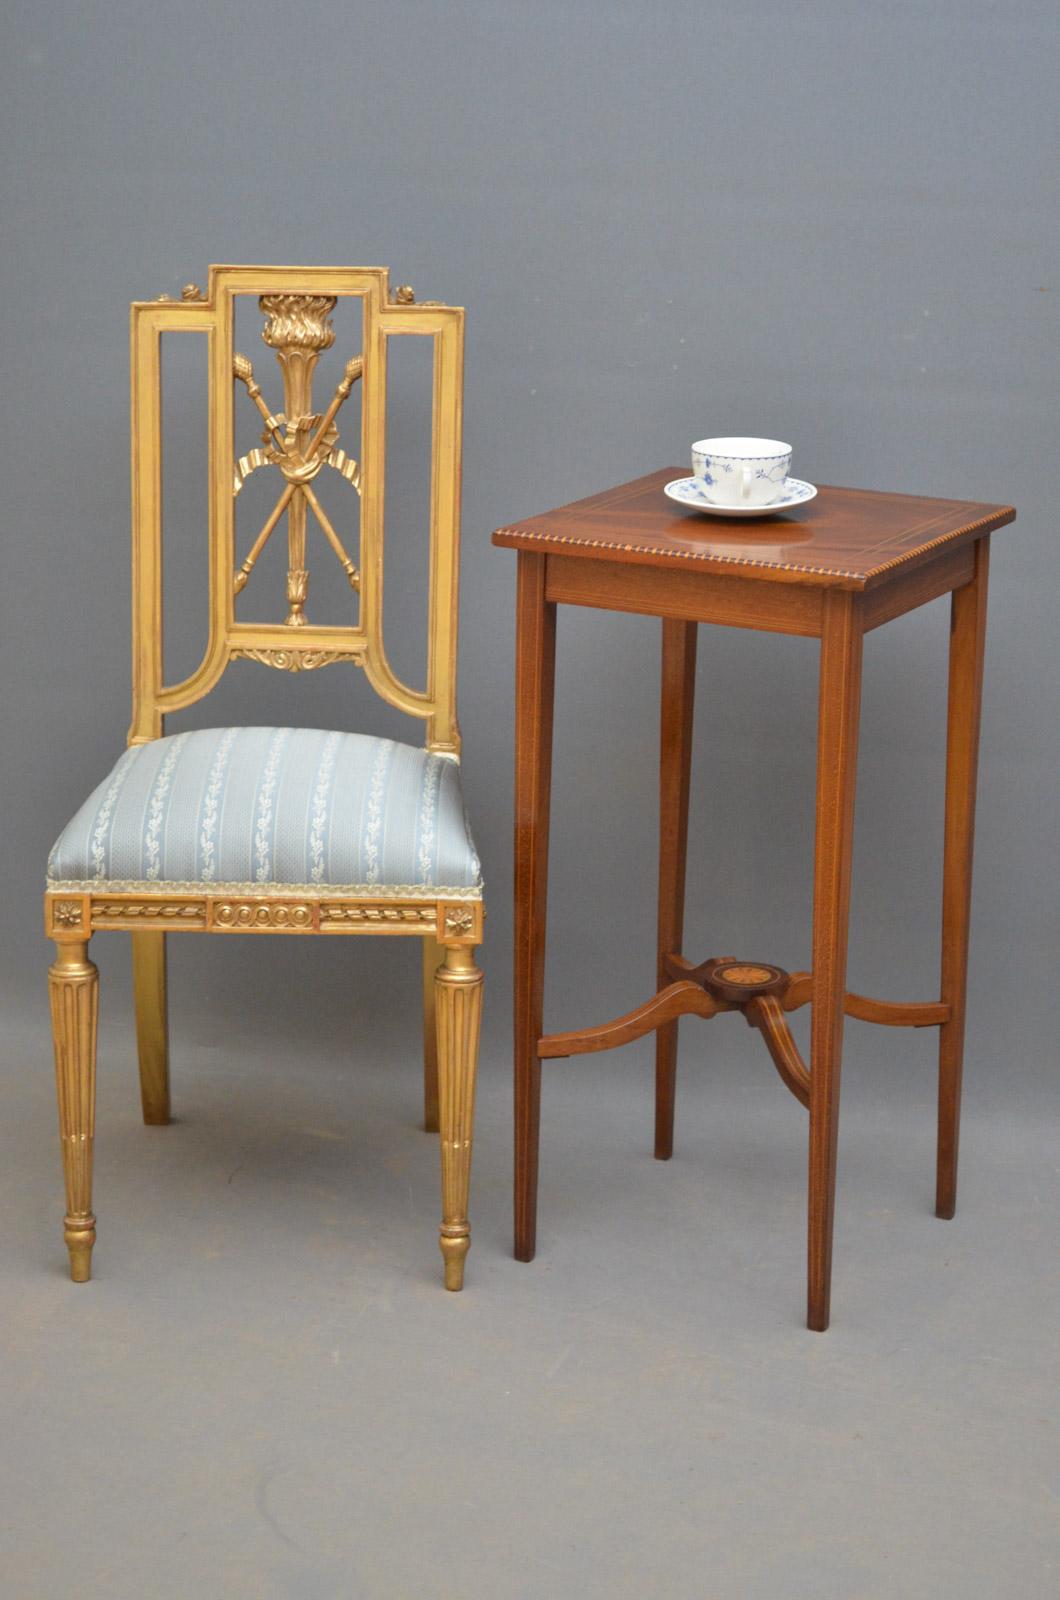 Sn3176 French gilt occasional / bedroom chair, having shaped and carved top rail, fully upholstered seat and carved front and side rails, all standing on elegant, fluted and tapering legs. This chair retains original gilding, circa 1890
Measures: H